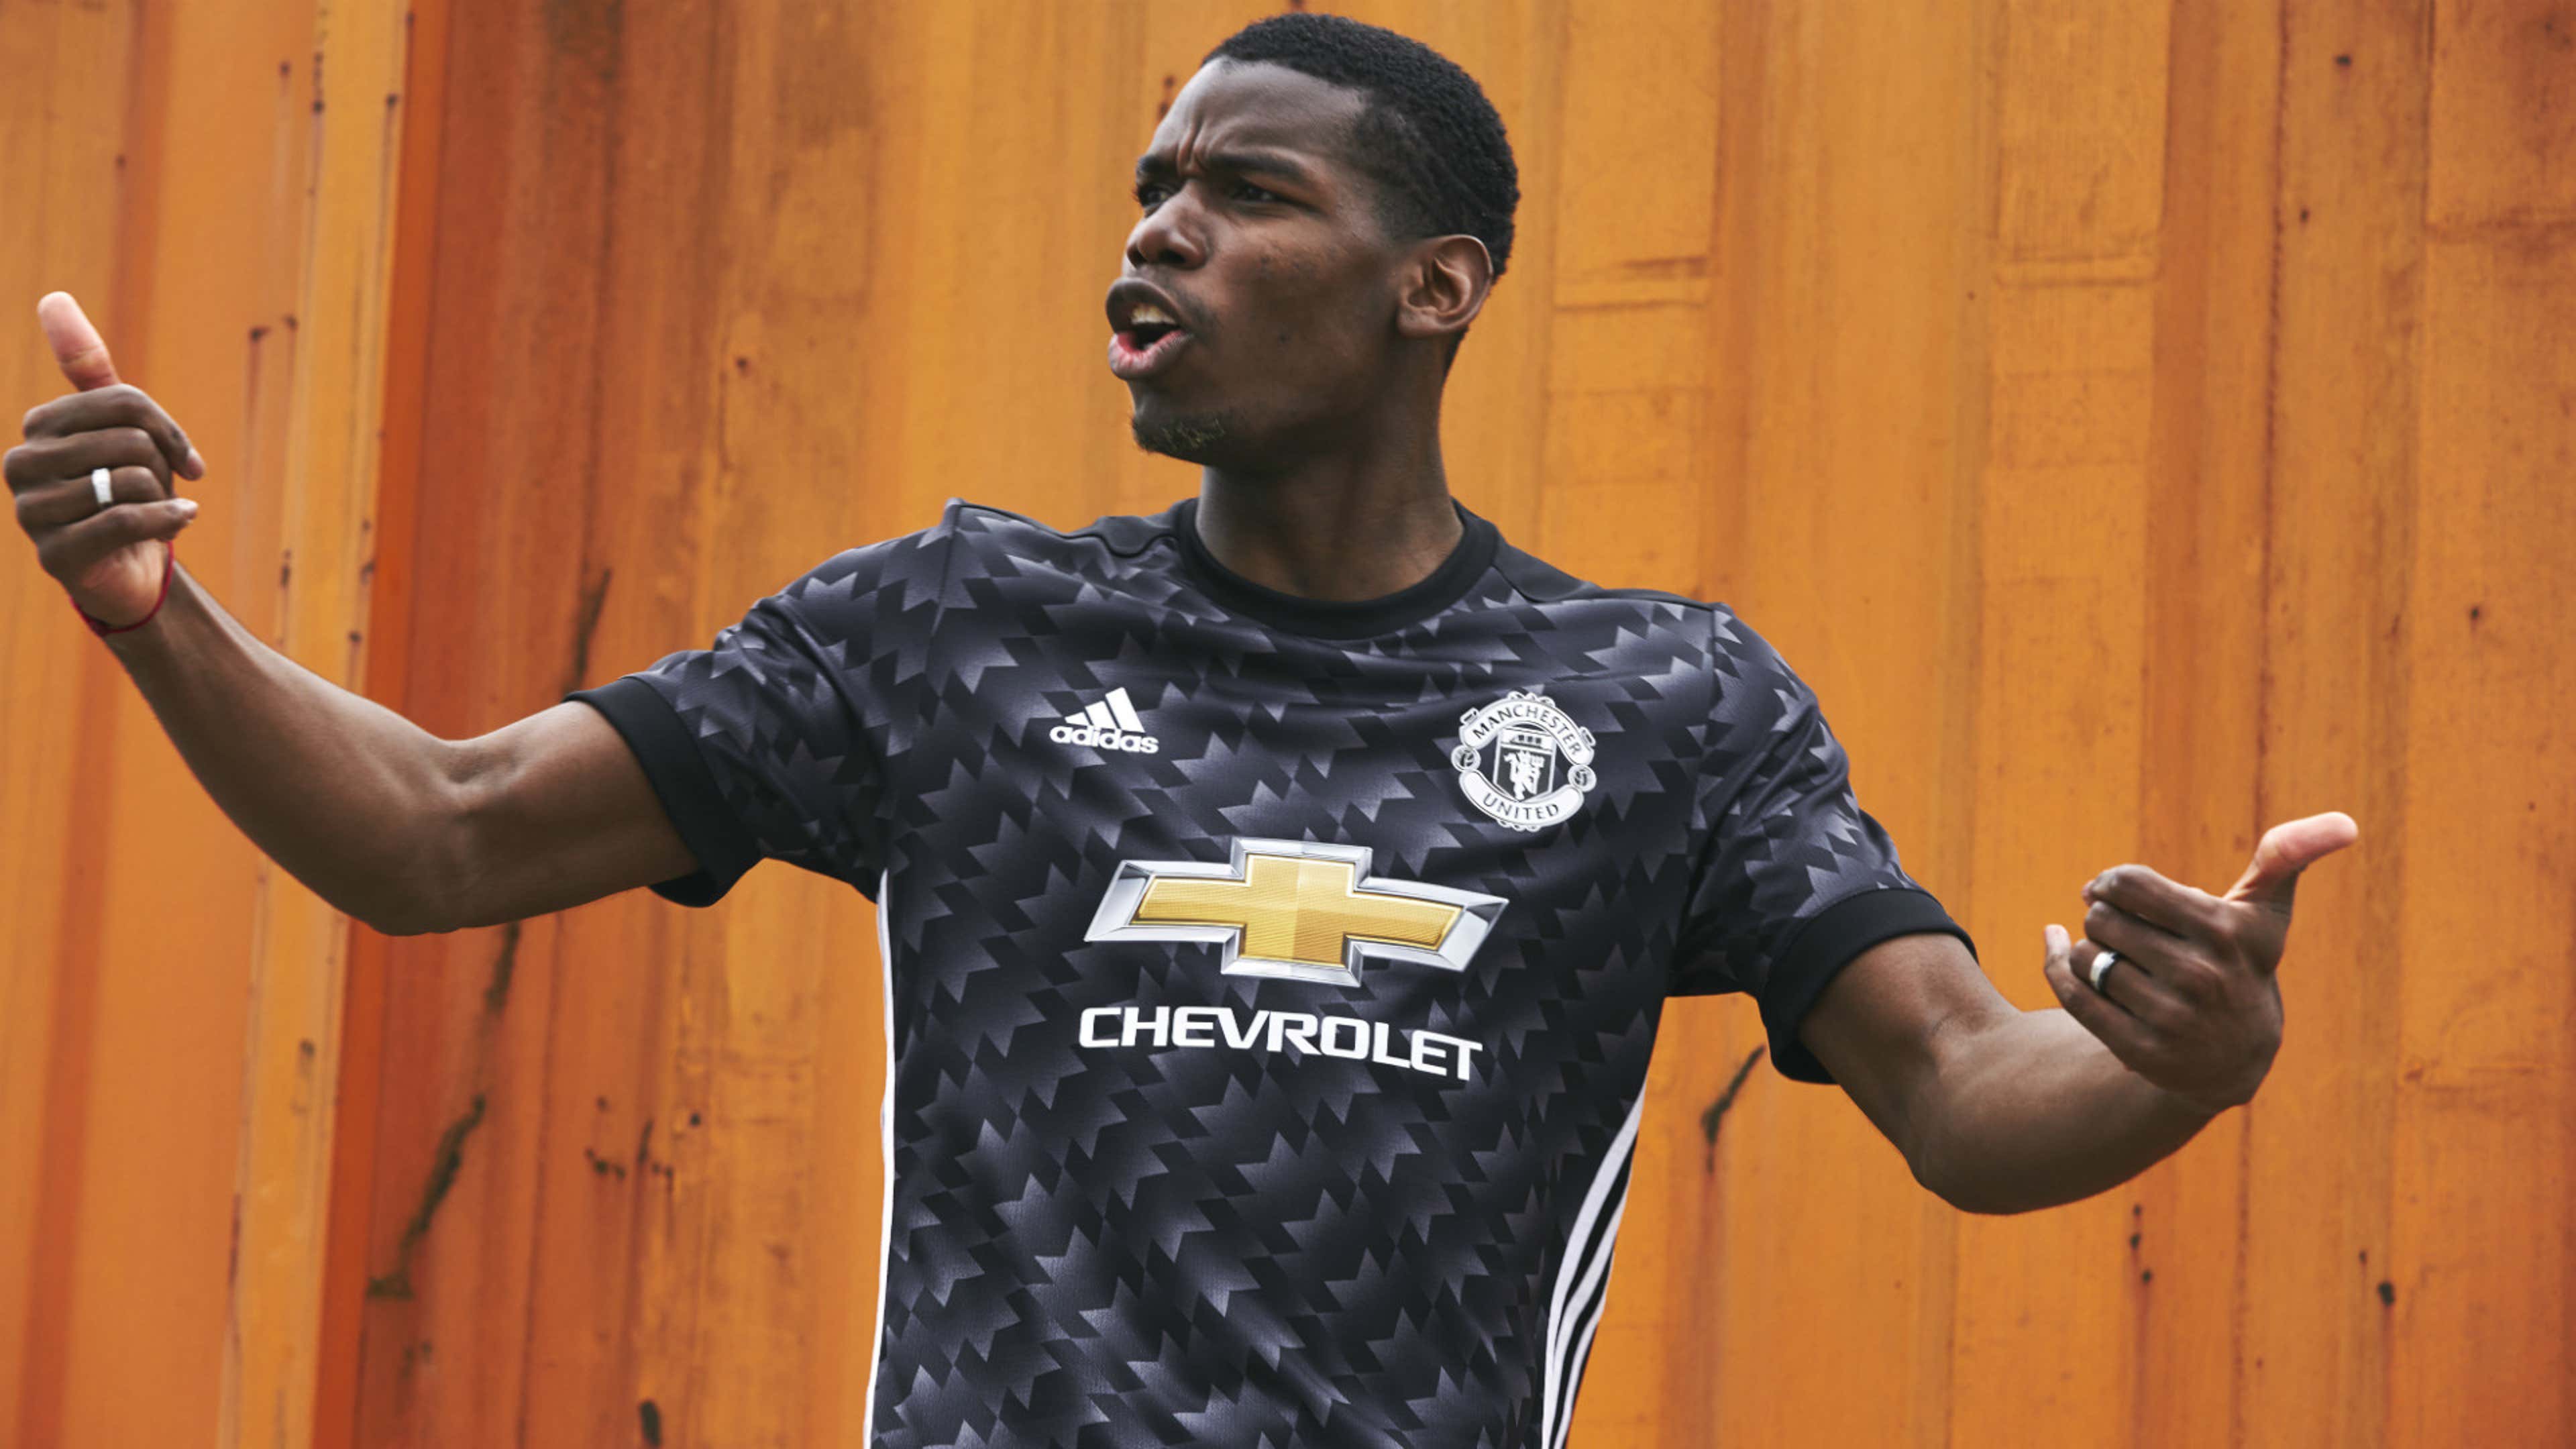 klodset laver mad Automatisering Man Utd kit: All the new Red Devils jerseys for the 2017-18 season |  Goal.com South Africa